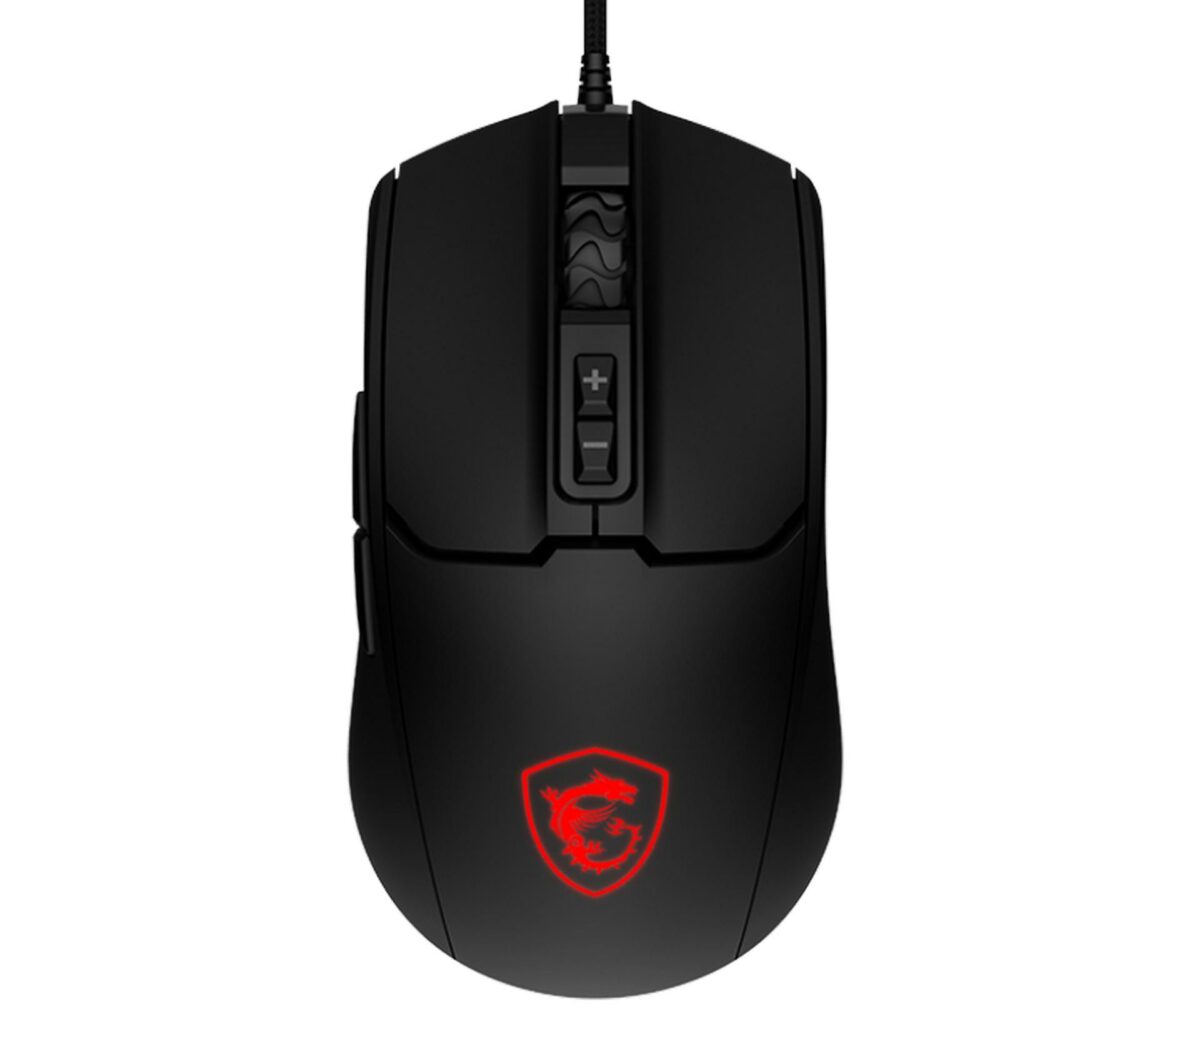 MSI Forge GM100 wired mouse.